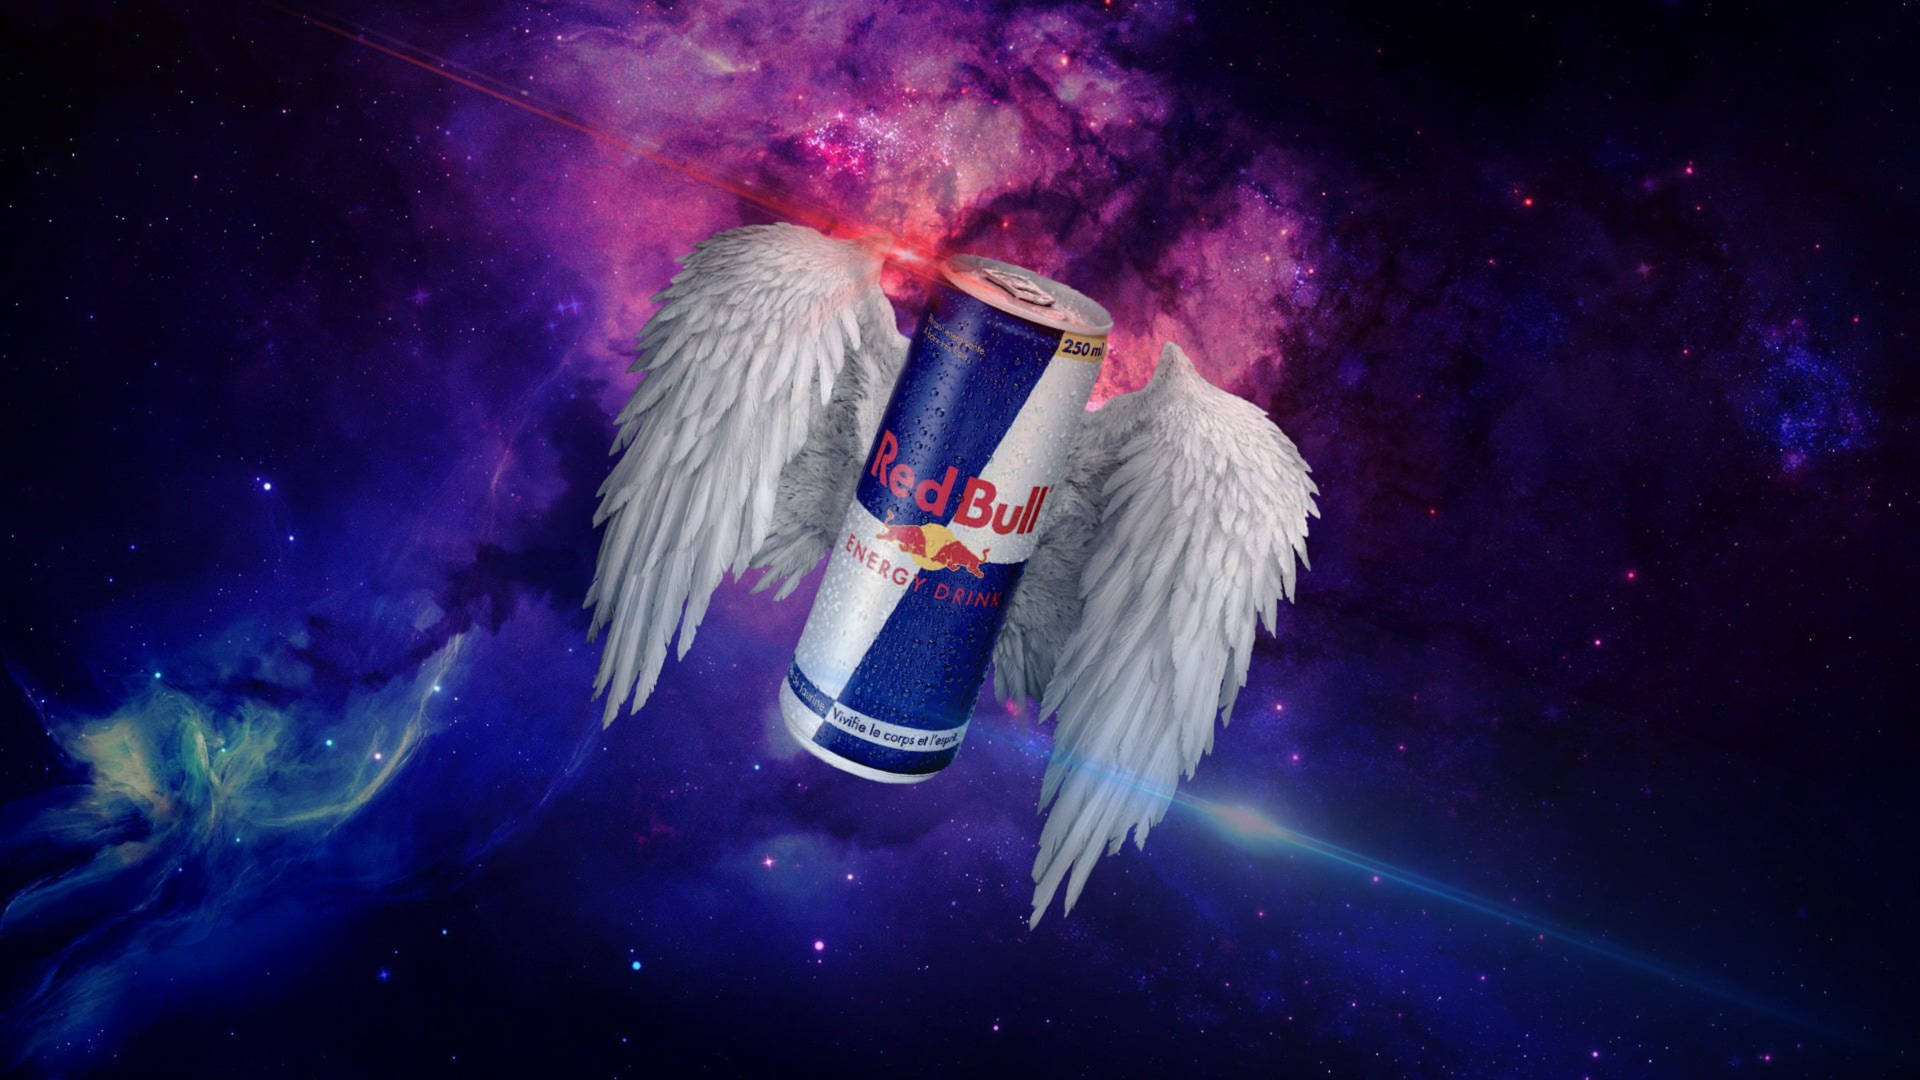 133753 Red Bull Images Stock Photos  Vectors  Shutterstock